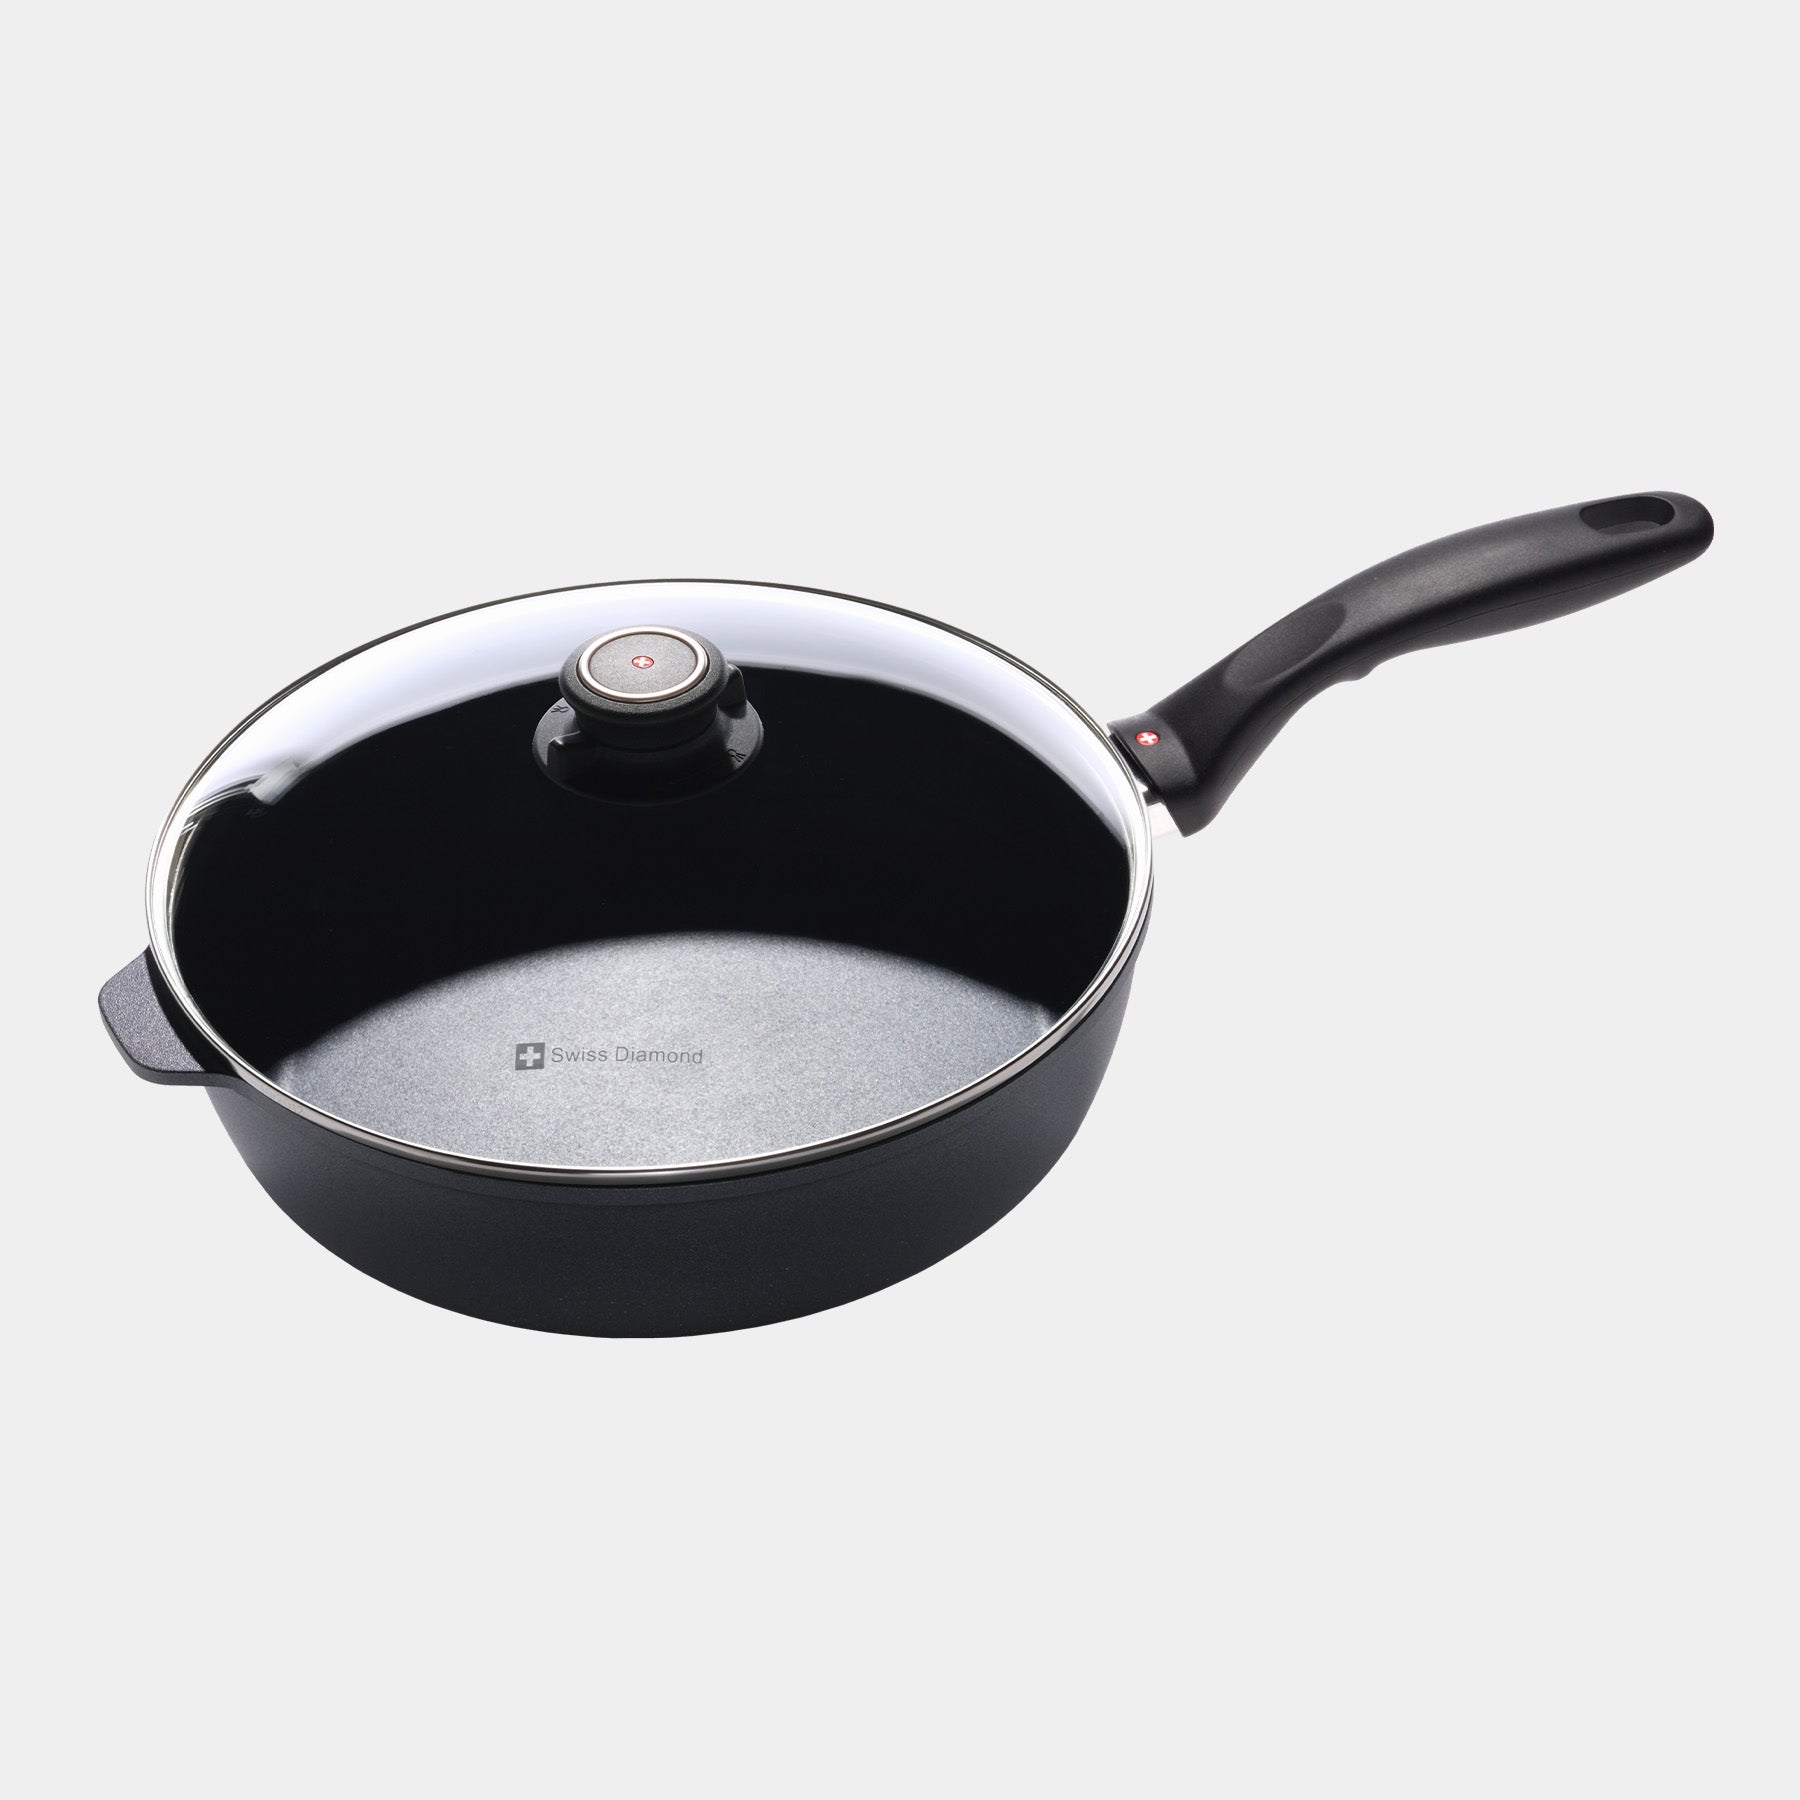 HD Nonstick 3.8 qt Saute Pan with Glass Lid - Induction